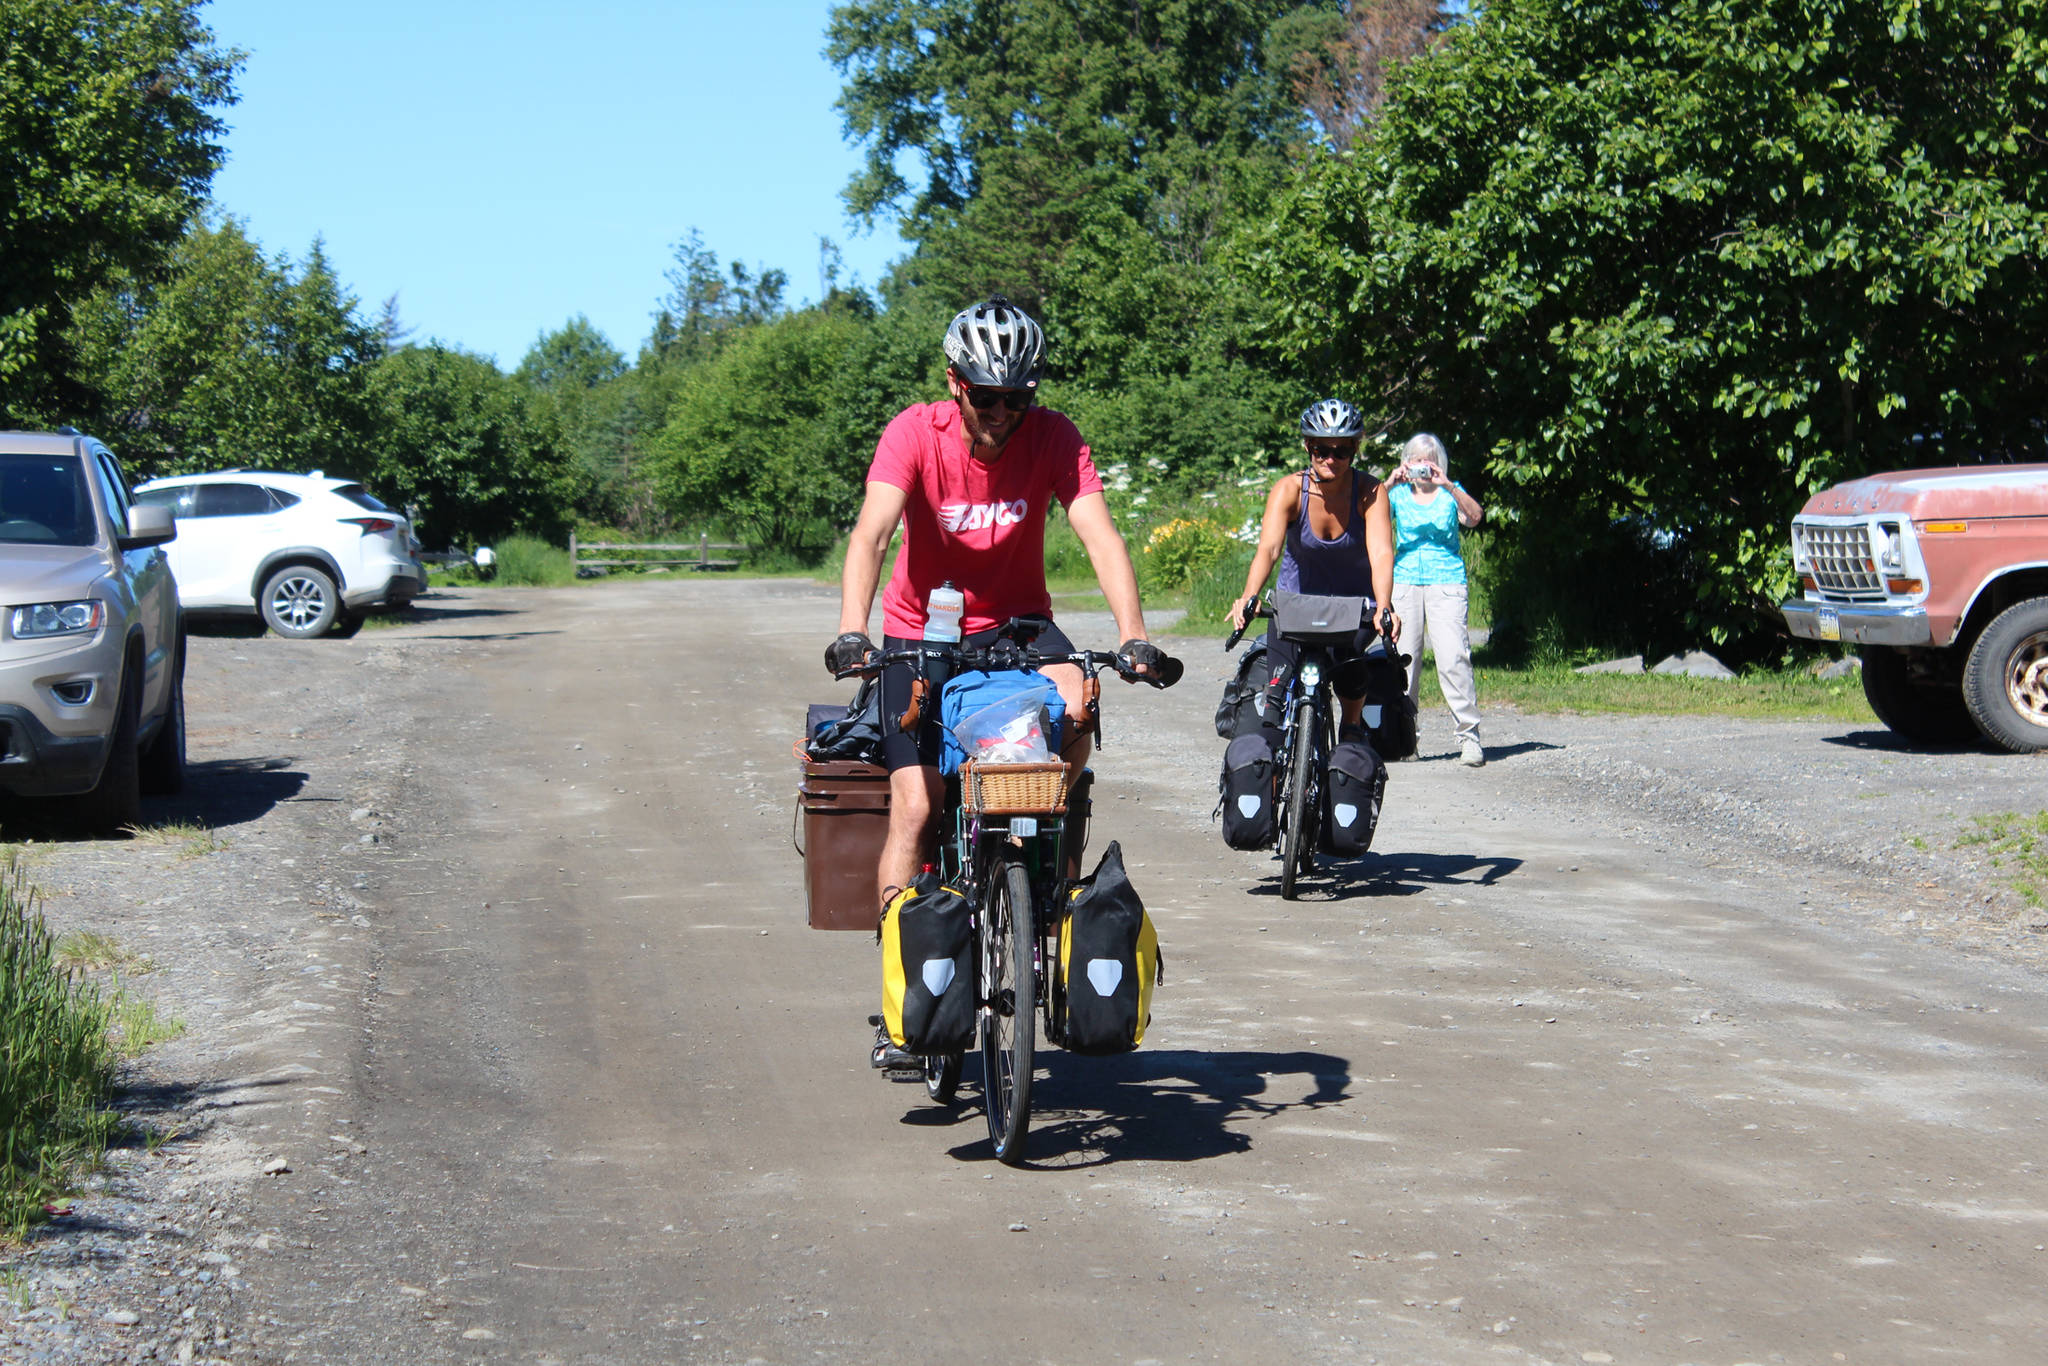 Chris Haag and Sophie George take off on their bikes from a rental on Hidden Way, with Haag’s grandmother taking a photo as they go, on Monday, July 2, 2018 in Homer, Alaska. The husband and wife are traveling by bike from Alaska to Argentina, a trip estimated to take two years. (Photo by Megan Pacer/Homer News)